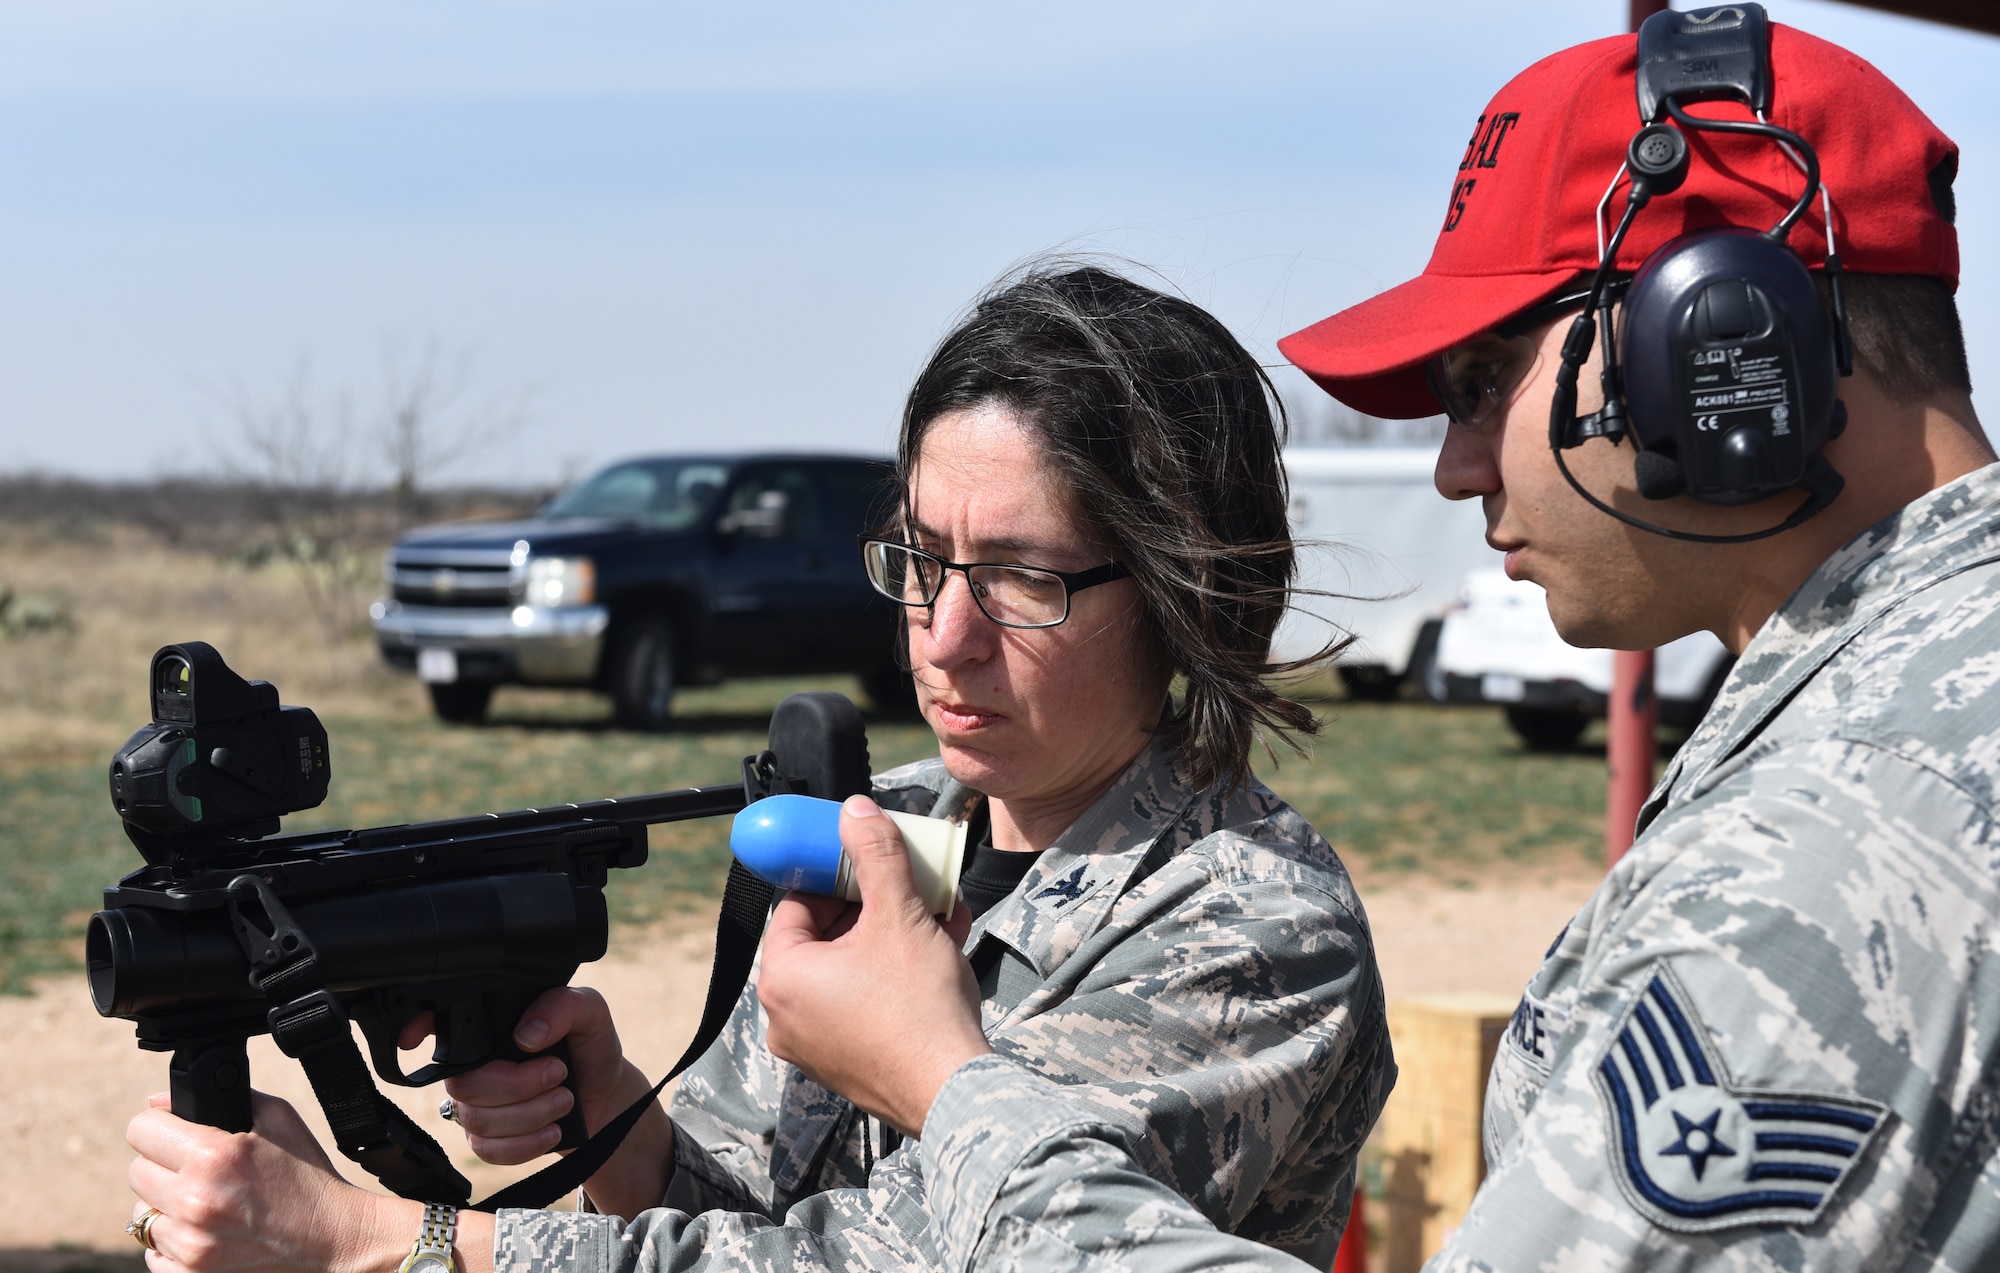 U.S. Air Force Col. Janet Urbanski, 17th Medical Group commander, receives coaching from Staff Sgt. Nestor Reyes II, 17 Security Forces Squadron combat arms instructor, during a demonstration at the San Angelo Police Department firing range, Texas, Feb. 15, 2019. Nestor explained the purpose of the sponge round and how it could be used during an altercation. (U.S. Air Force photo by Airman 1st Class Isiah Jacobs/Released)